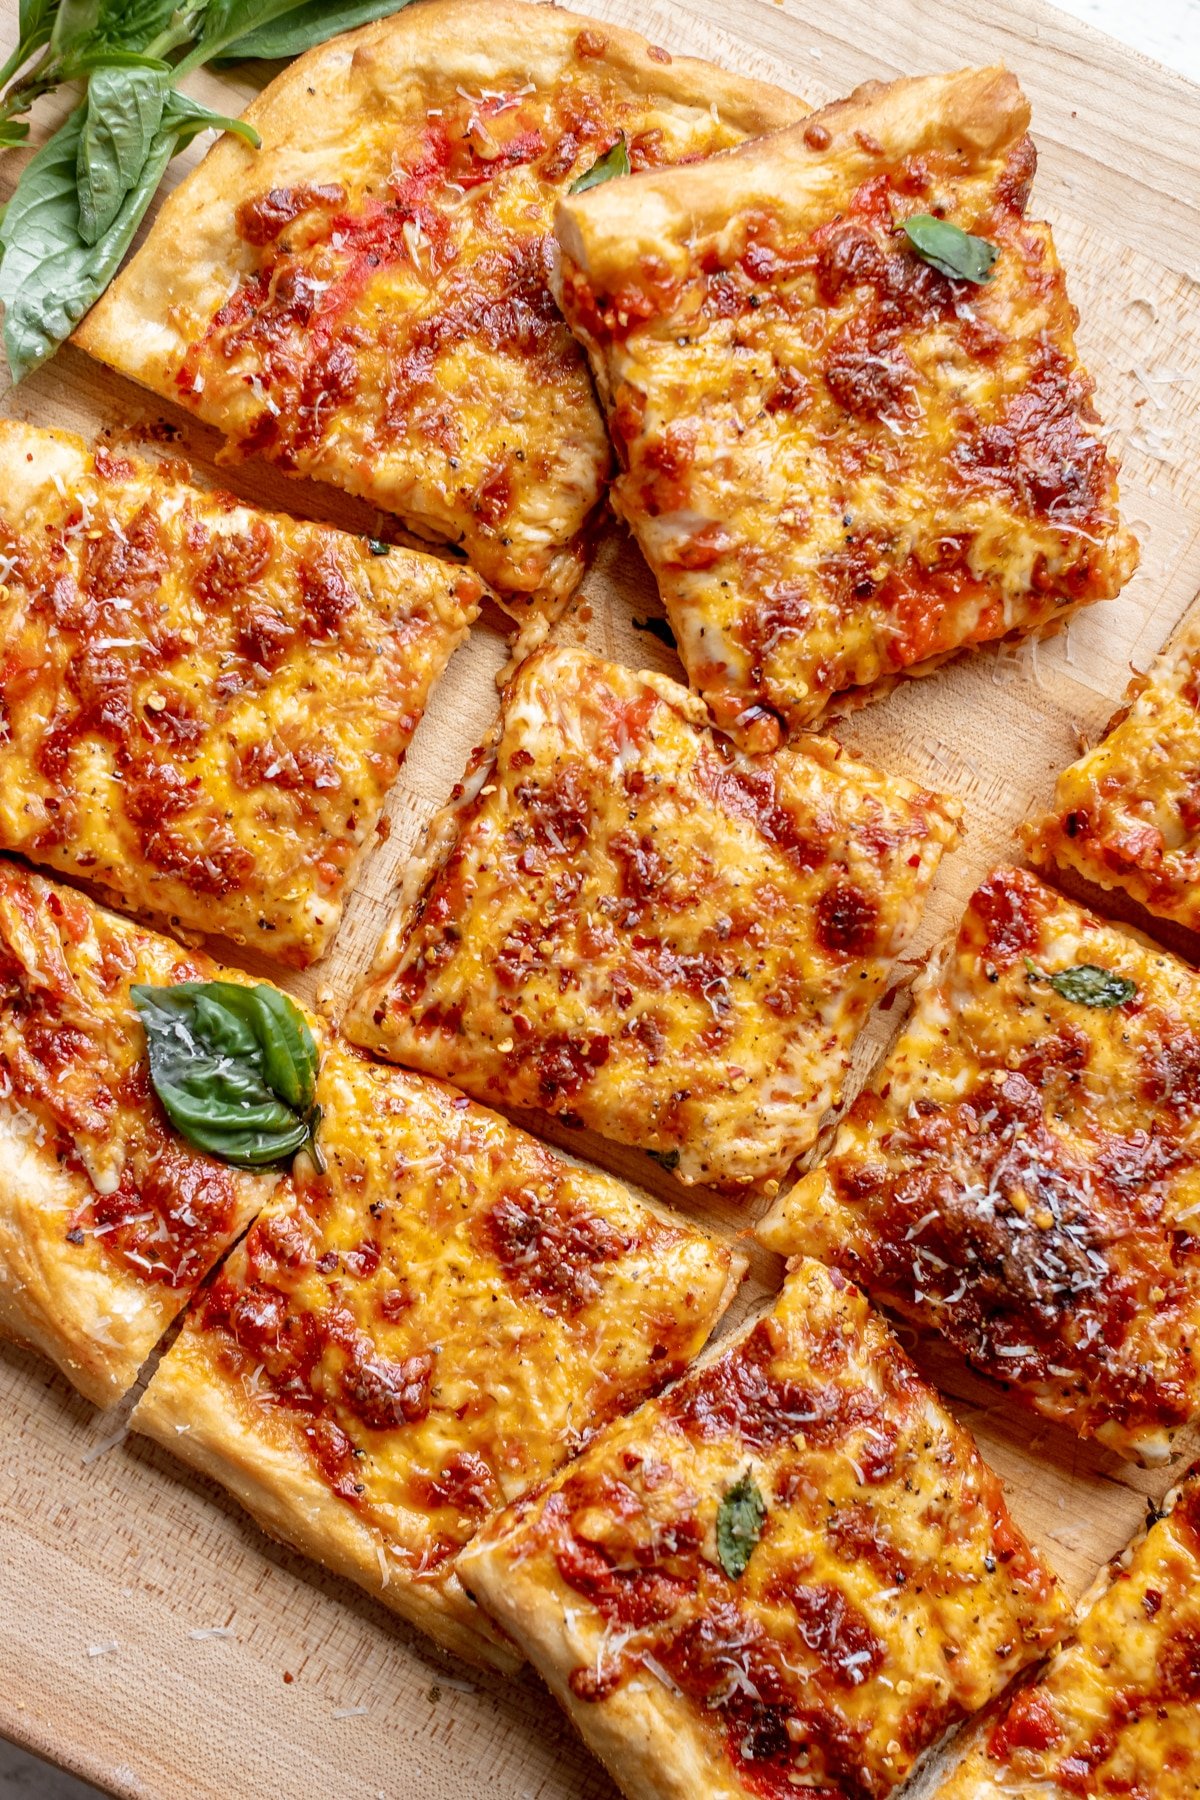 a close up image of pizza garnished with parmesan cheese.